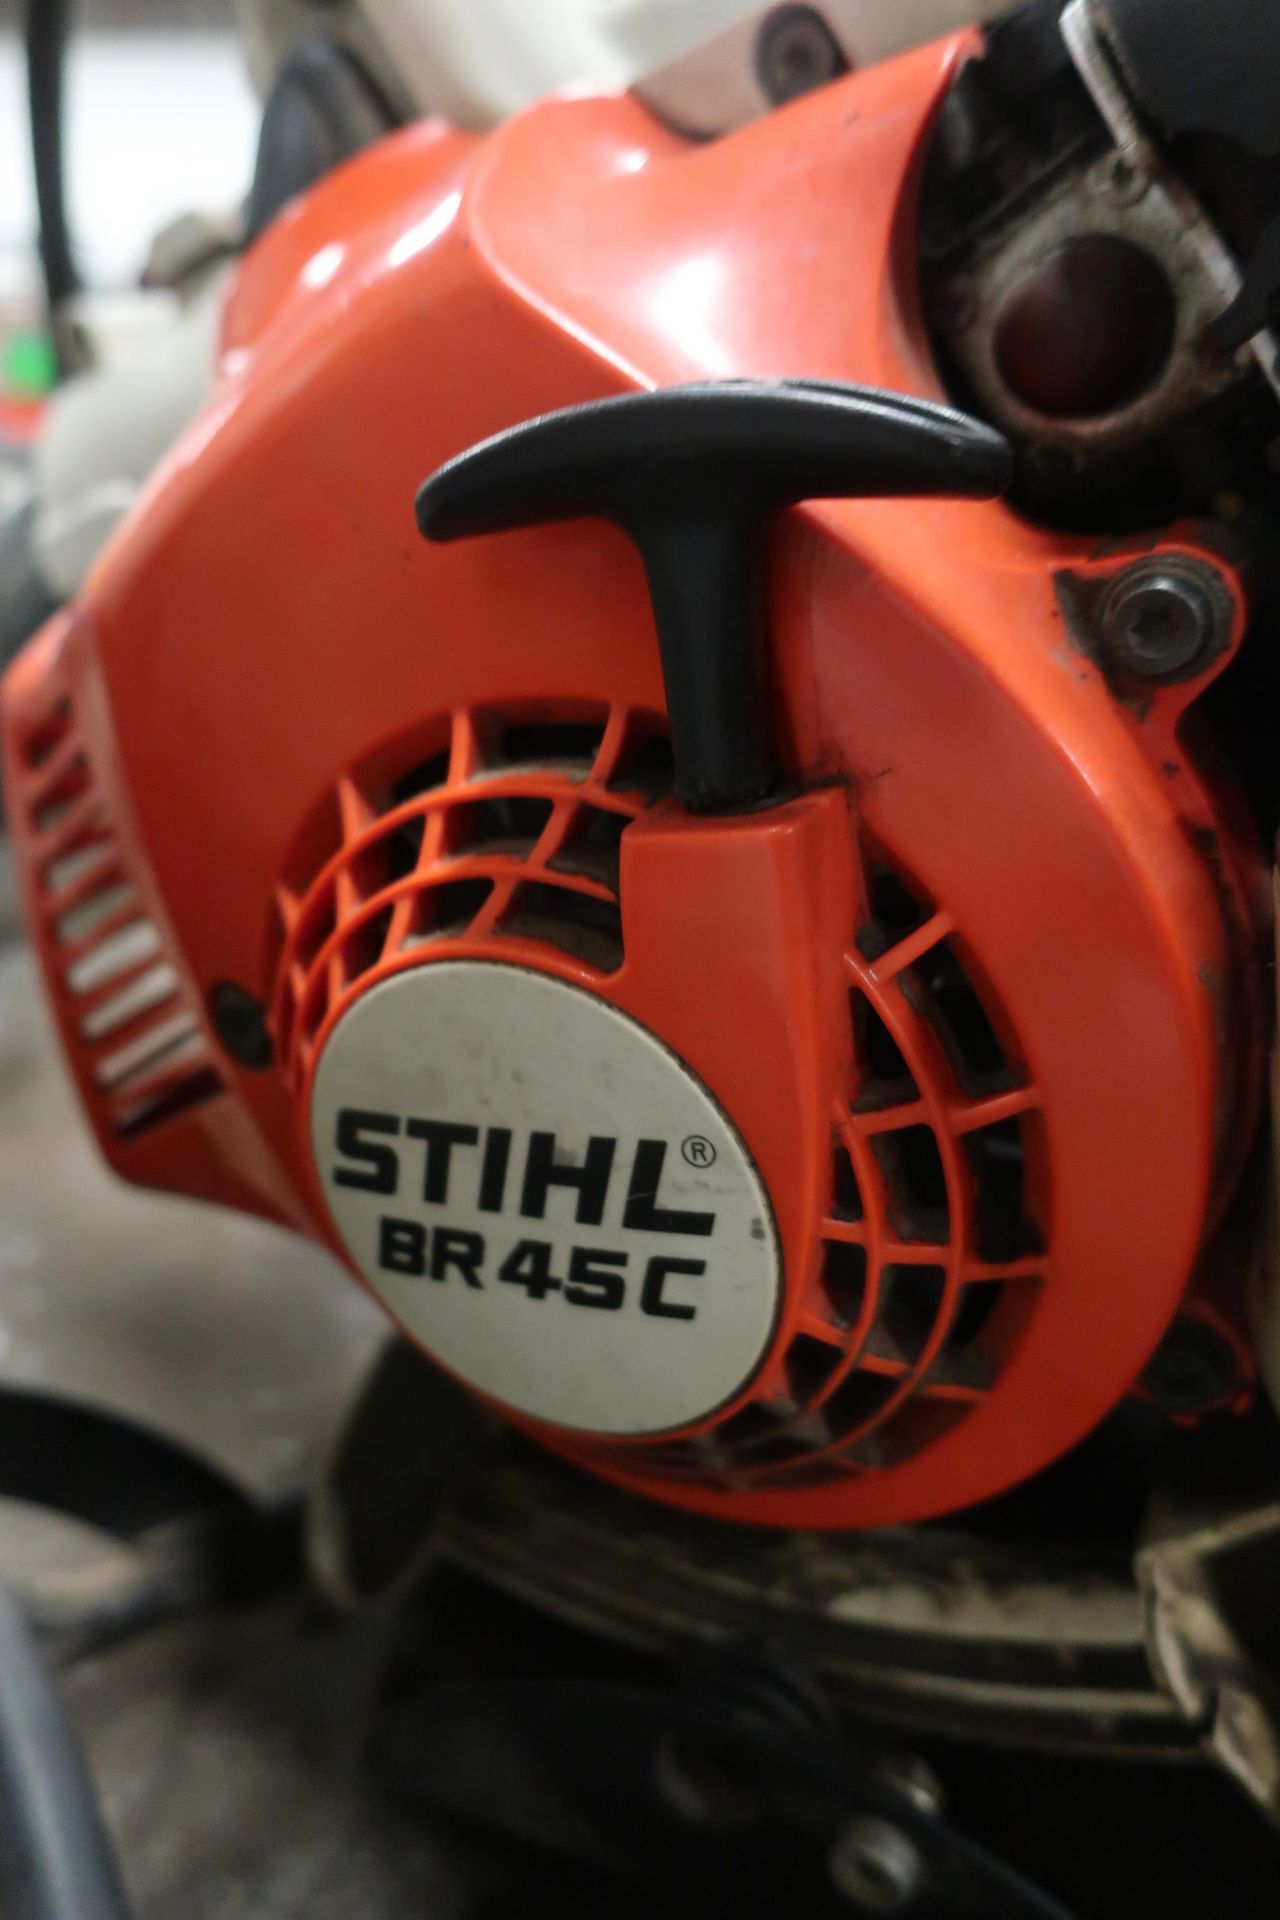 Stihl model BR-45C Leaf Blower Portable Gas Powered BACK PACK blower mint - Image 2 of 2